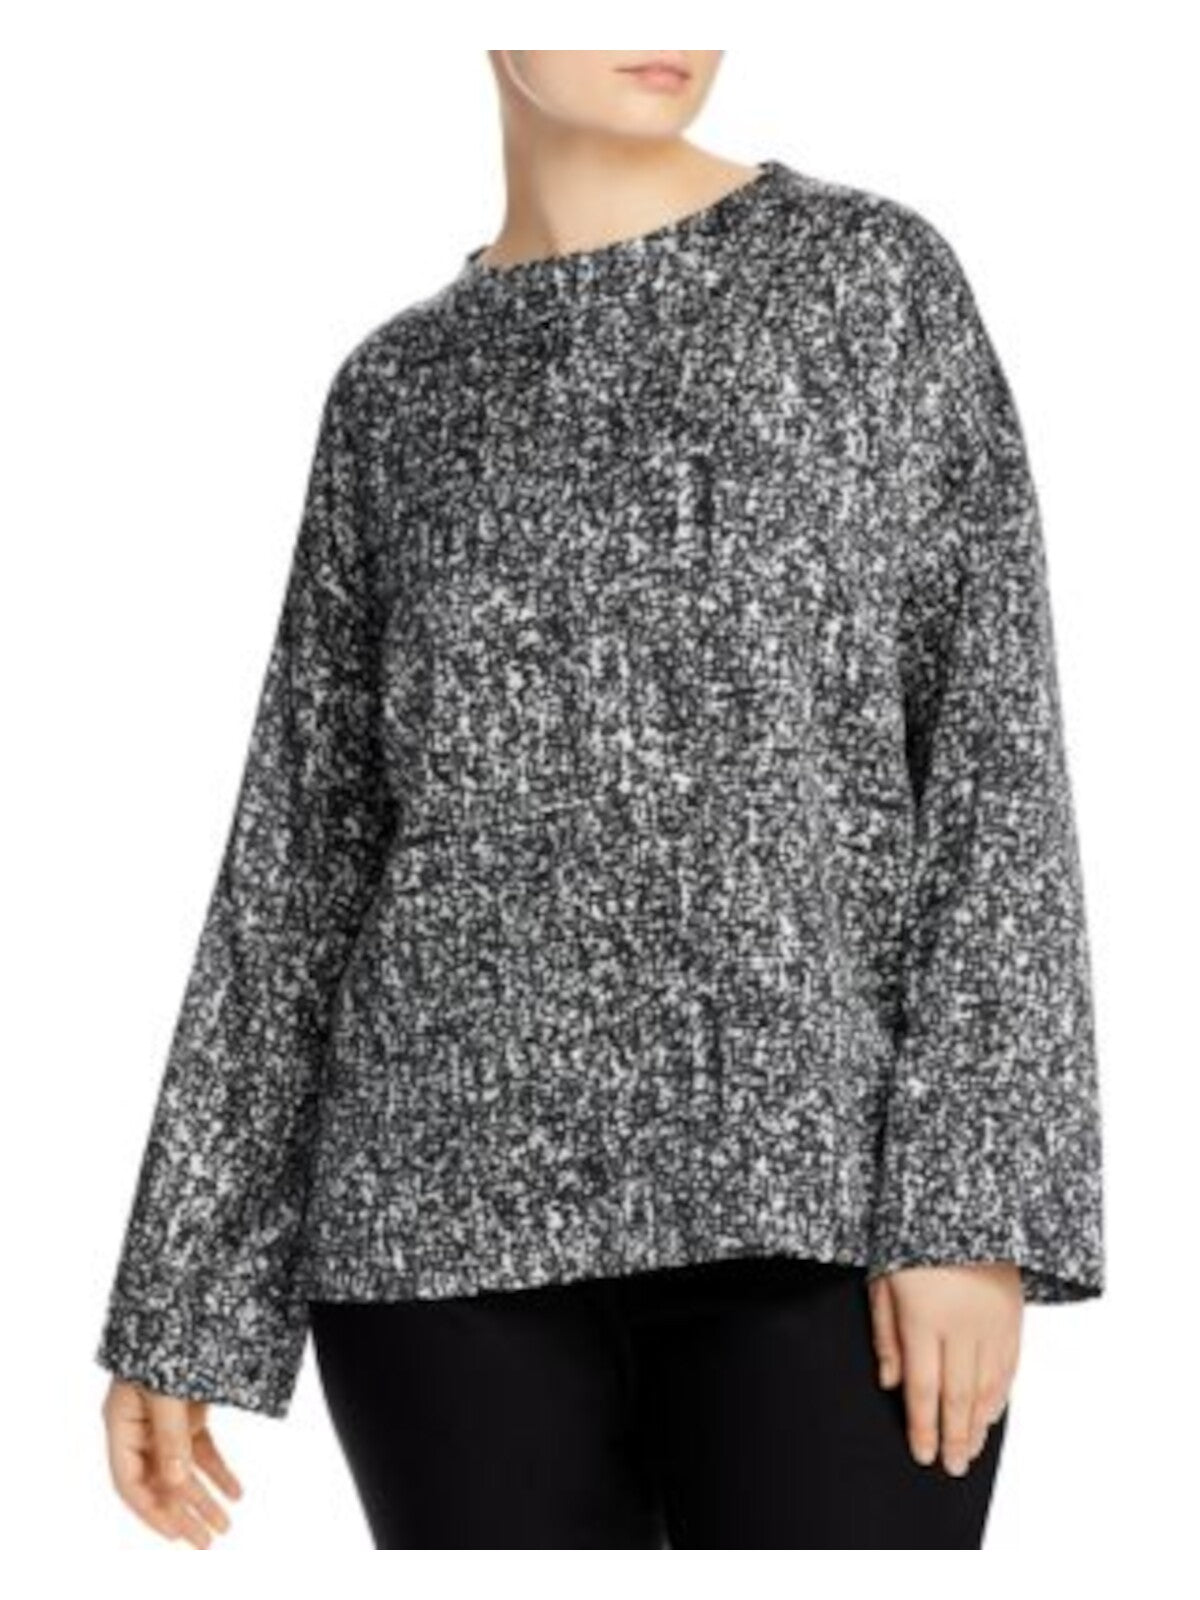 EILEEN FISHER Womens Black Printed Long Sleeve V Neck Wear To Work Blouse L